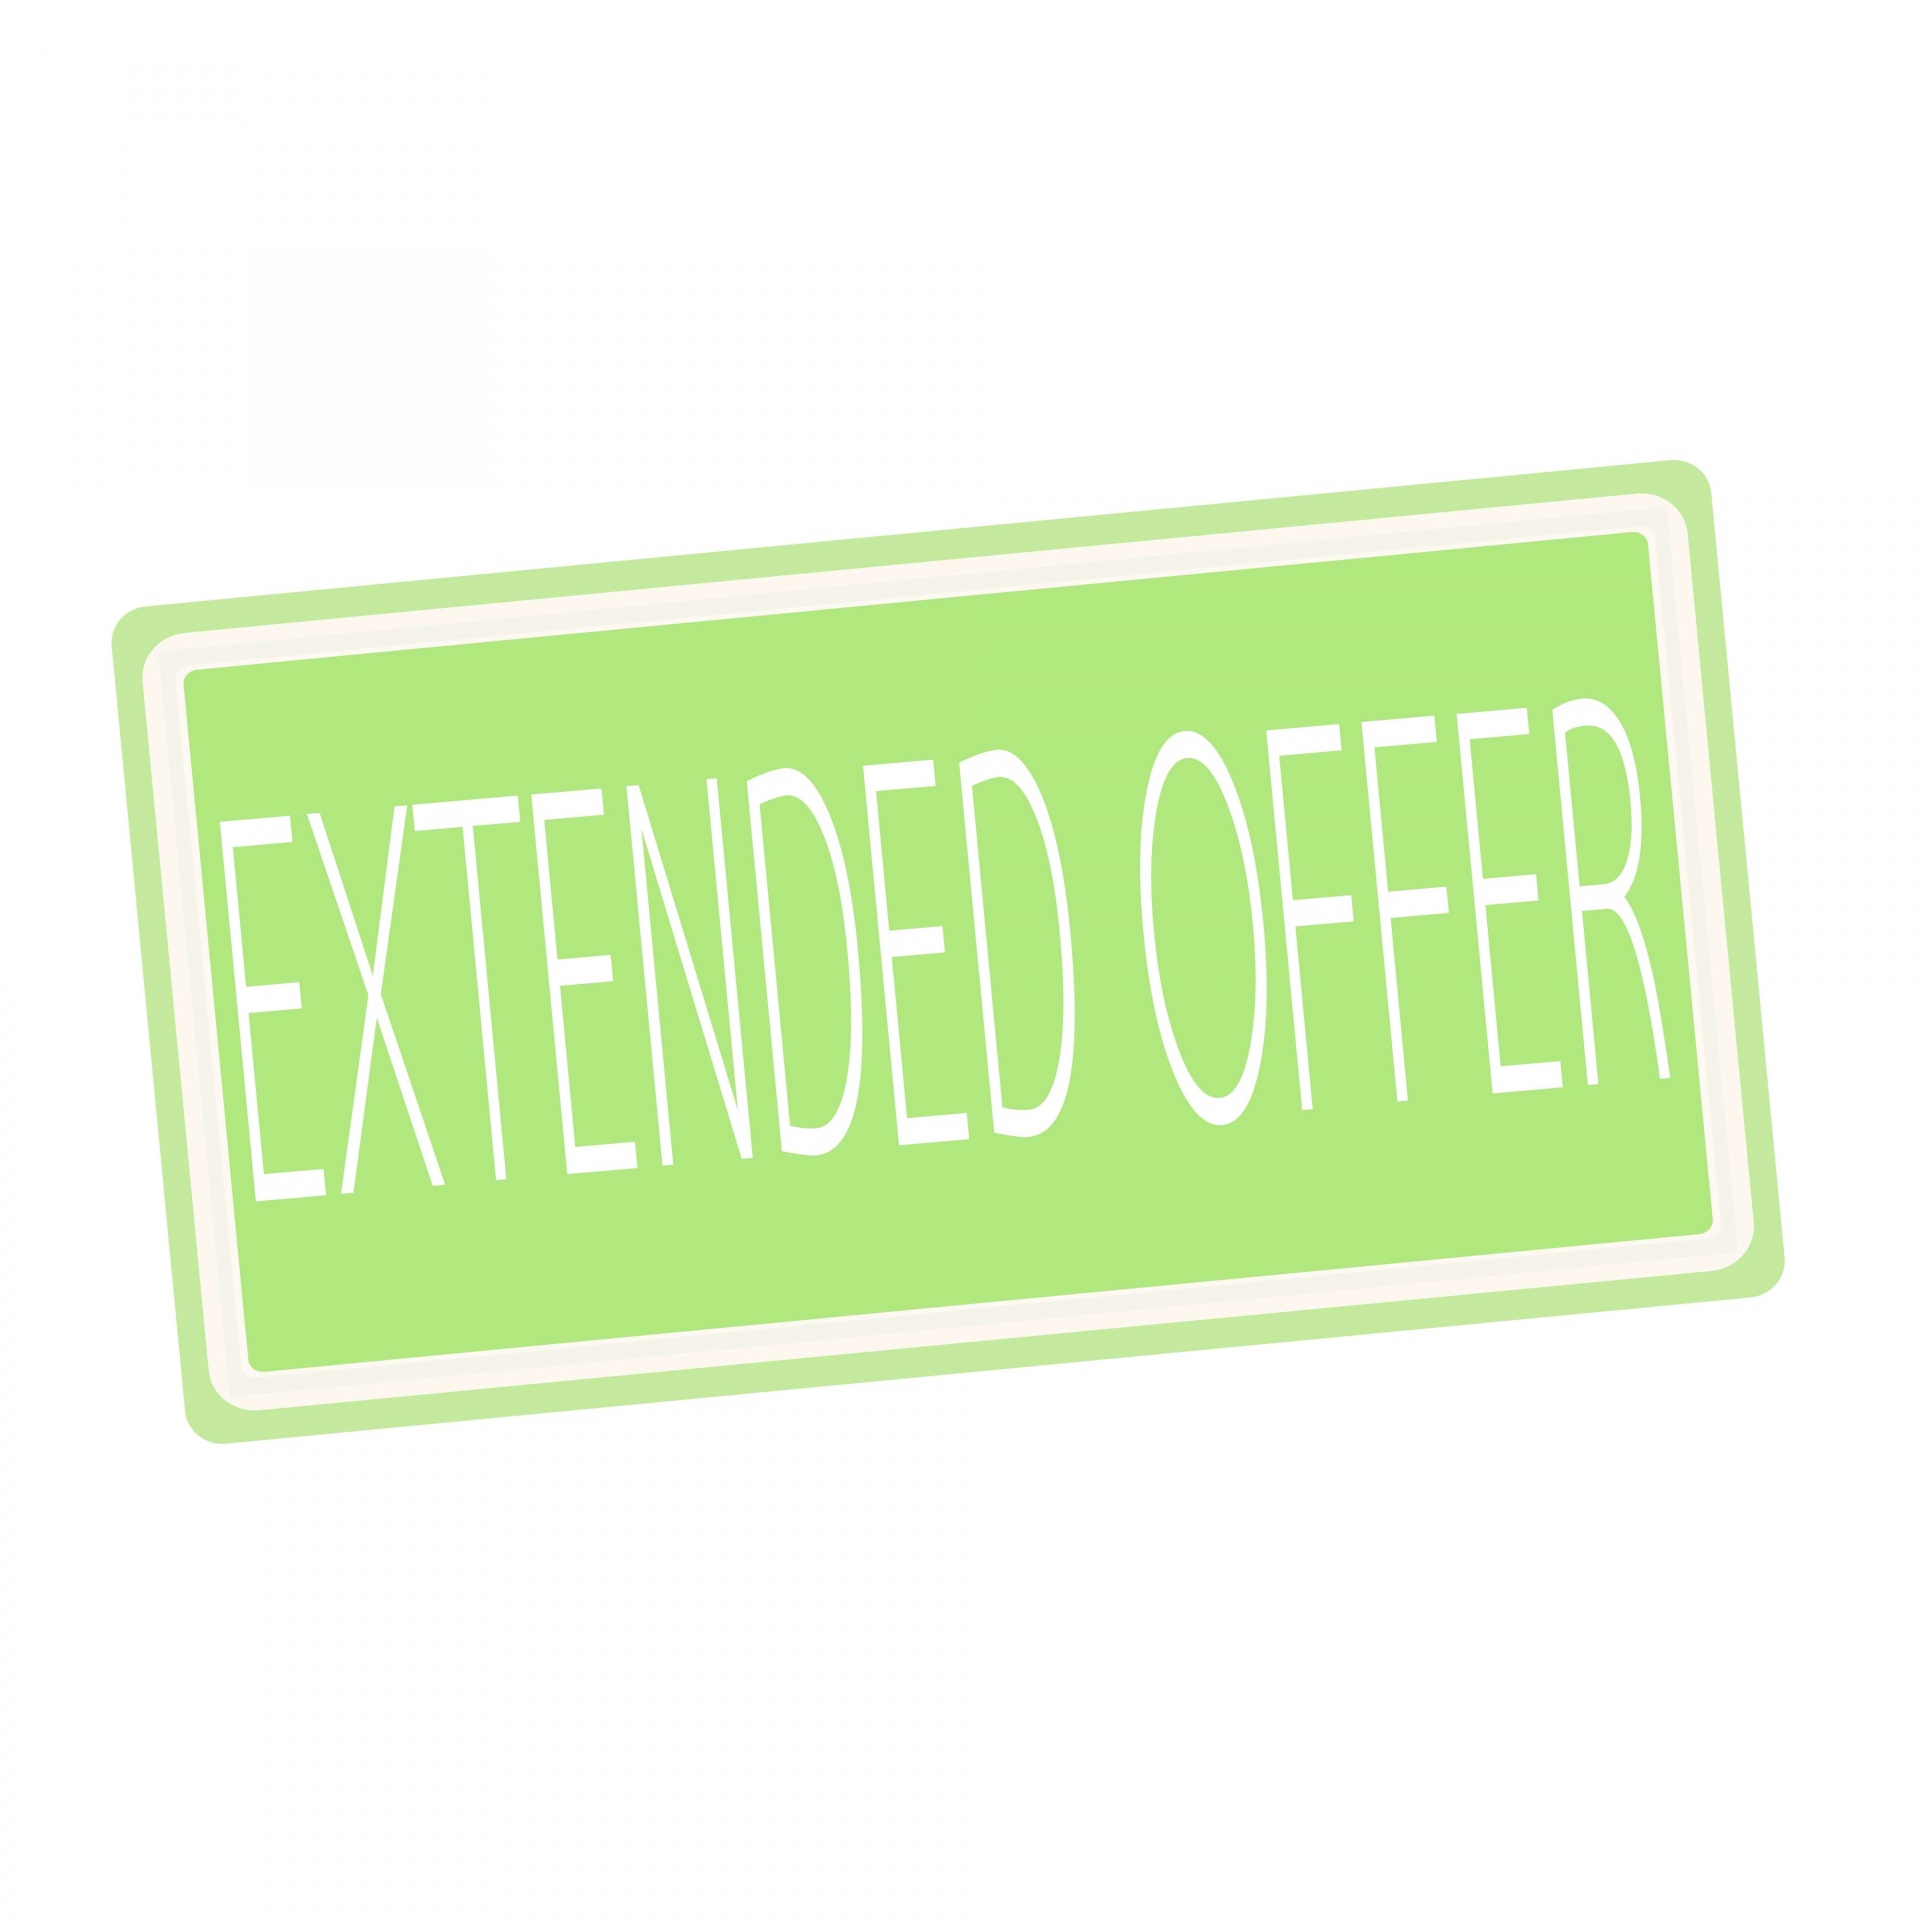 Extended offer white stamp text on green